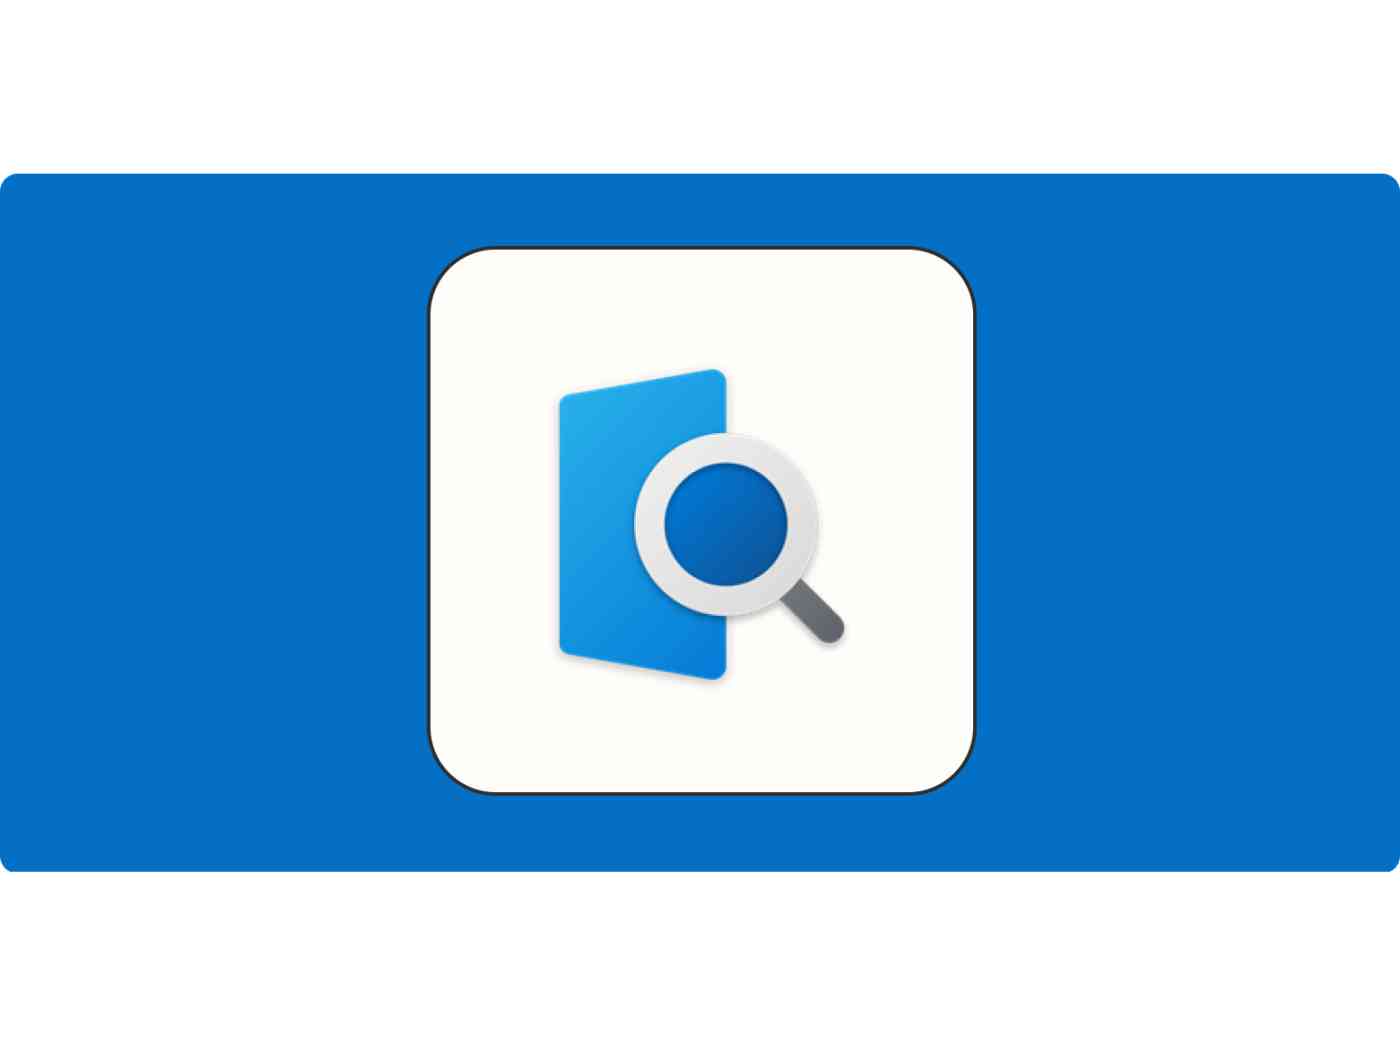 A hero image with the QuickLook logo on a blue background